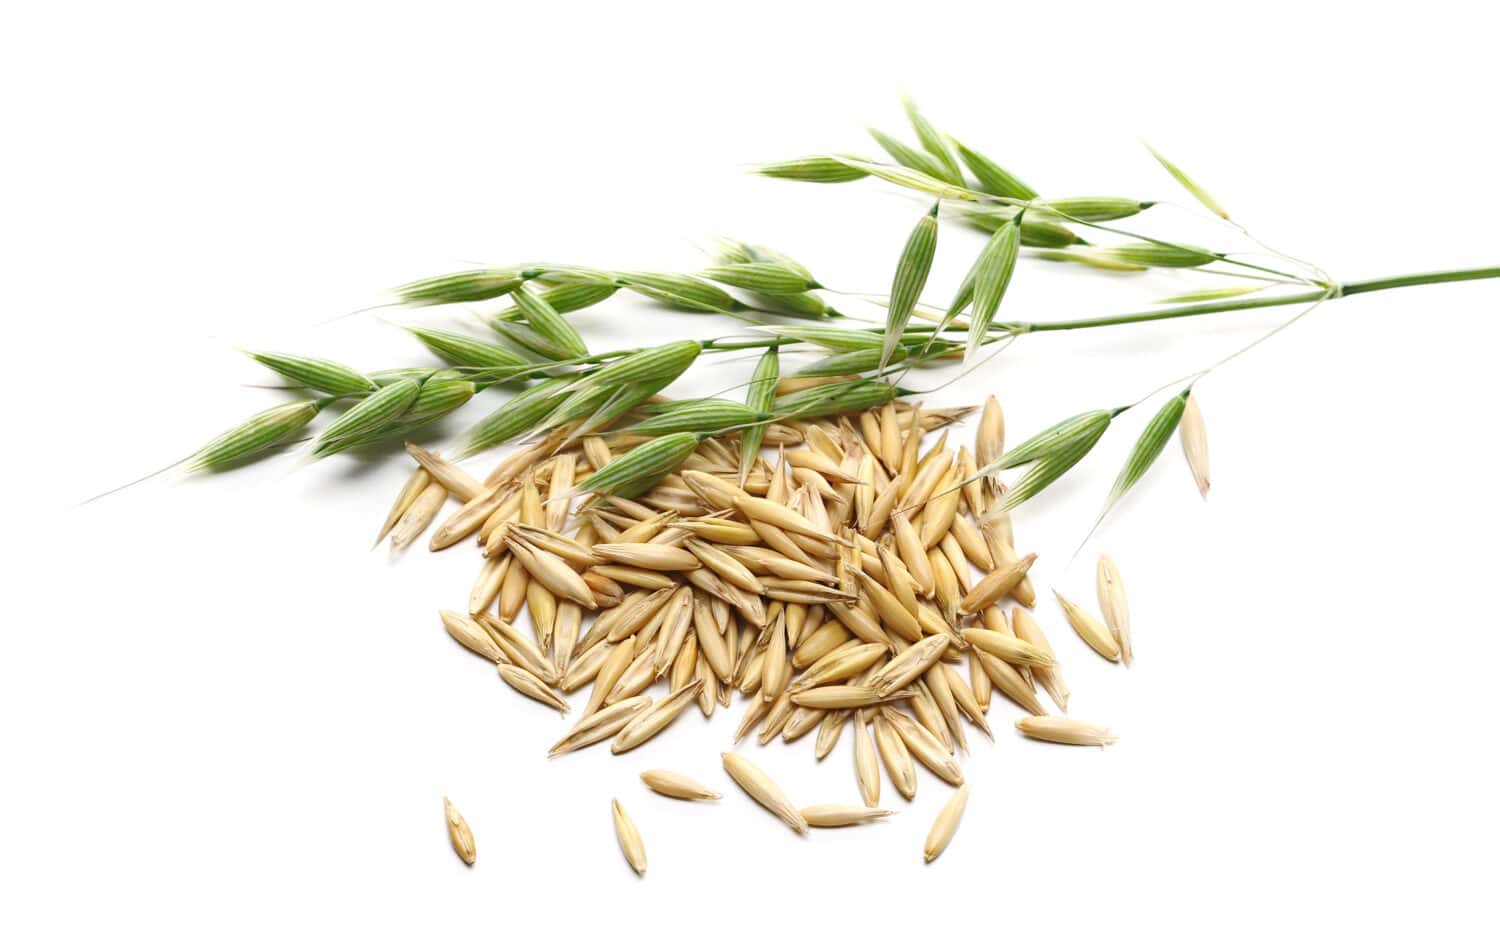 Yellow ripe unpeeled oats and green young oats isolated on white background